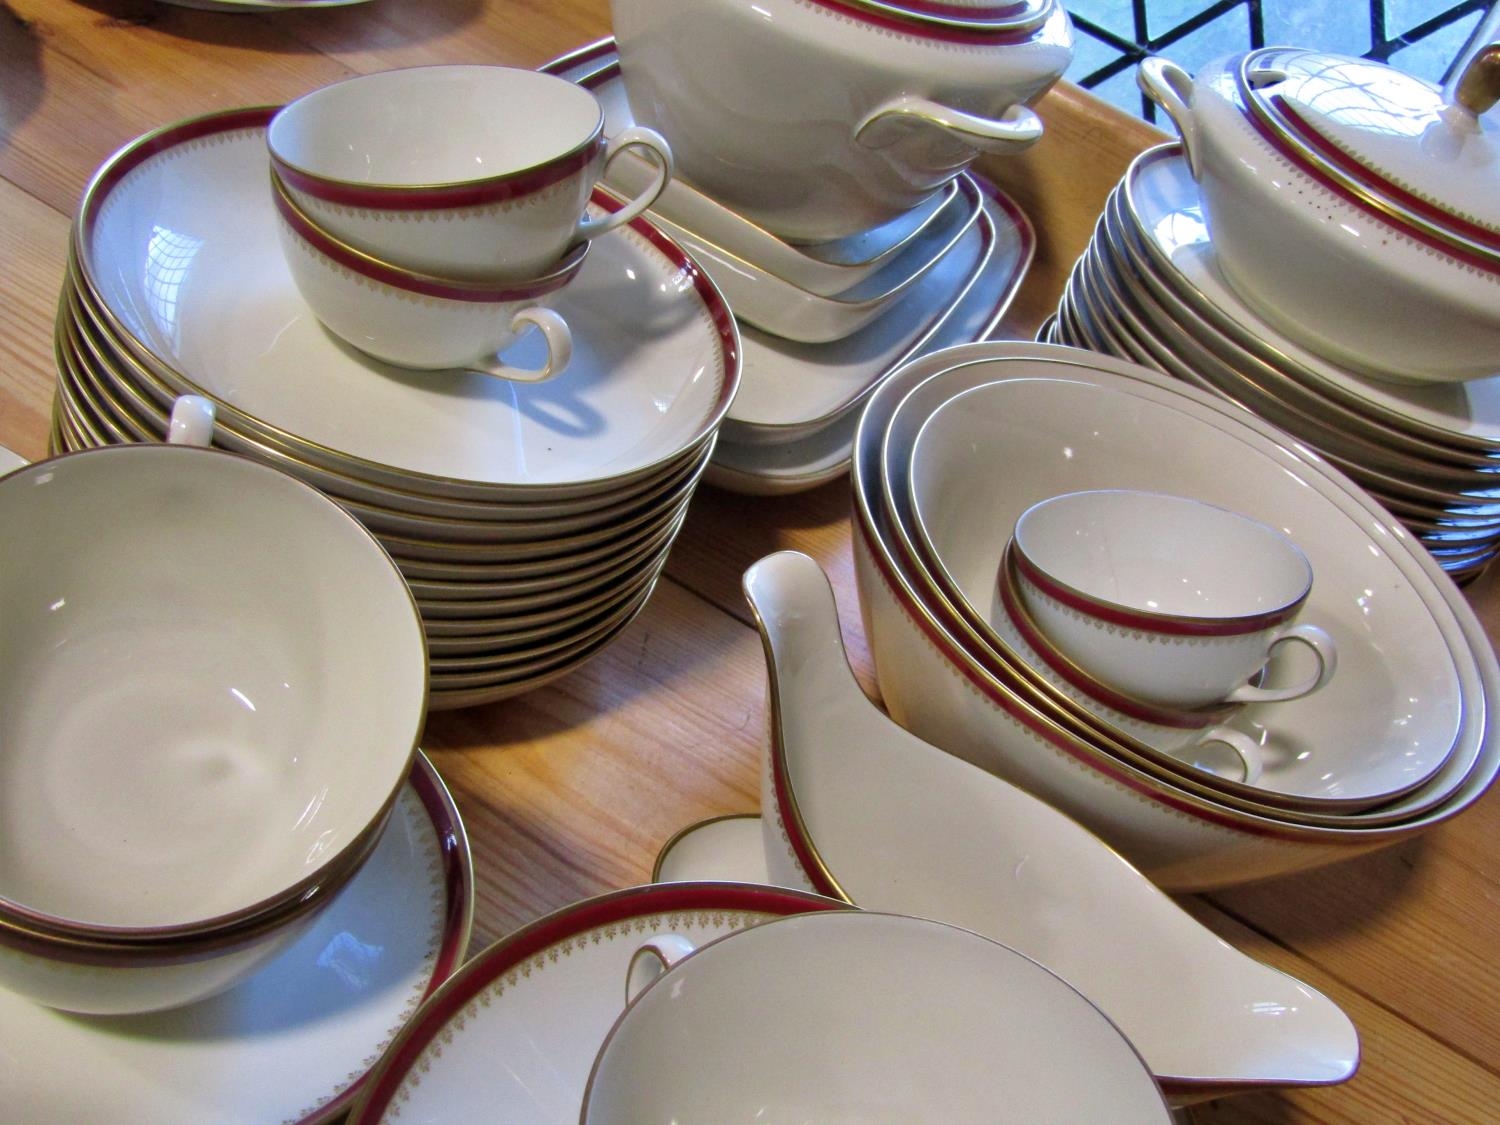 A Langenthal porcelain dinner service with oxblood and gilt banded borders comprising dinner plates, - Image 2 of 5